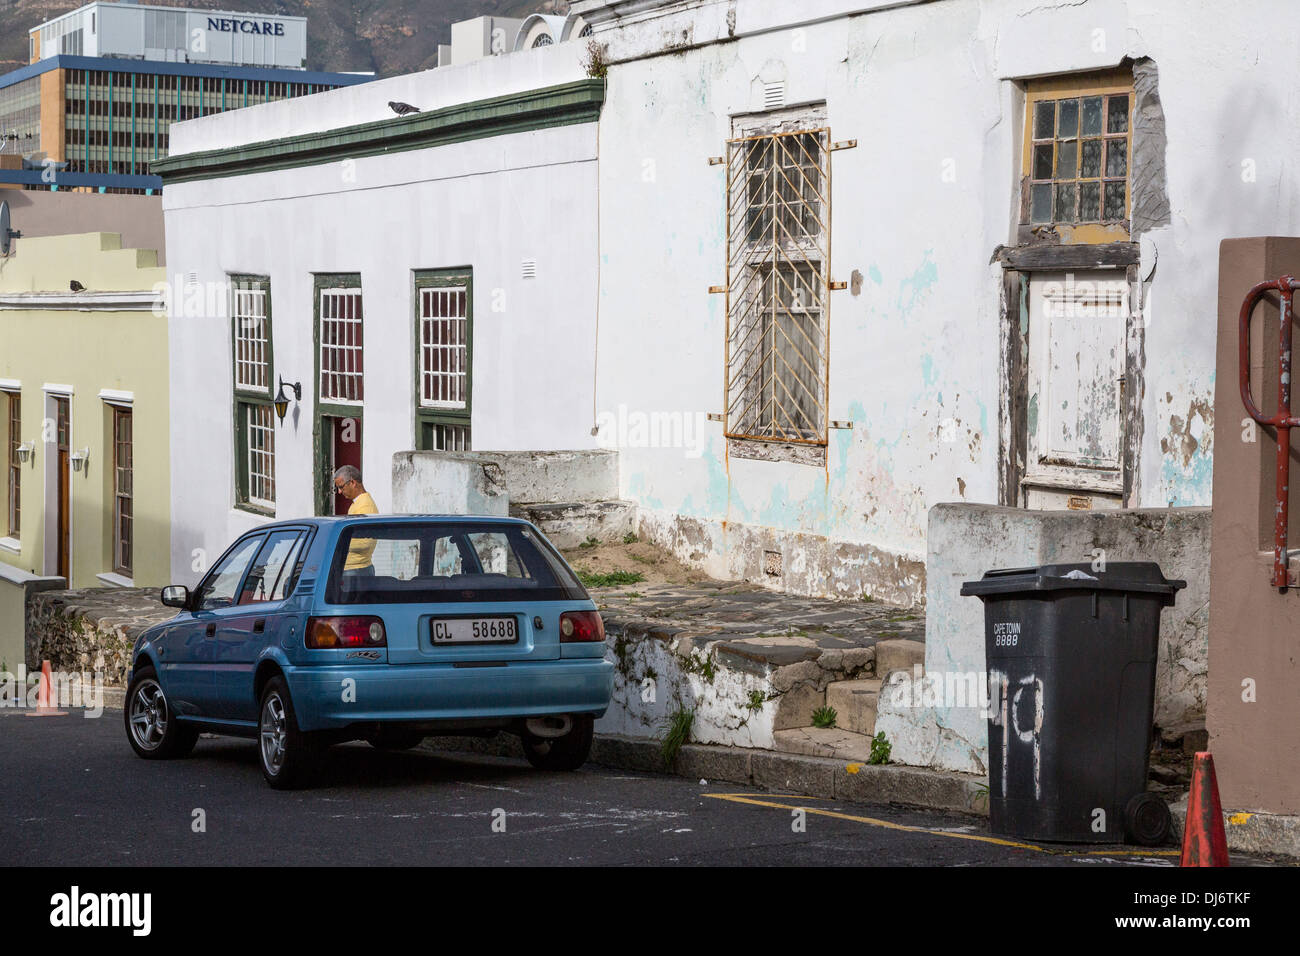 South Africa, Cape Town, Bo-kaap. Old, Unpainted House. During the apartheid era Bo-kaap houses were painted white. Stock Photo